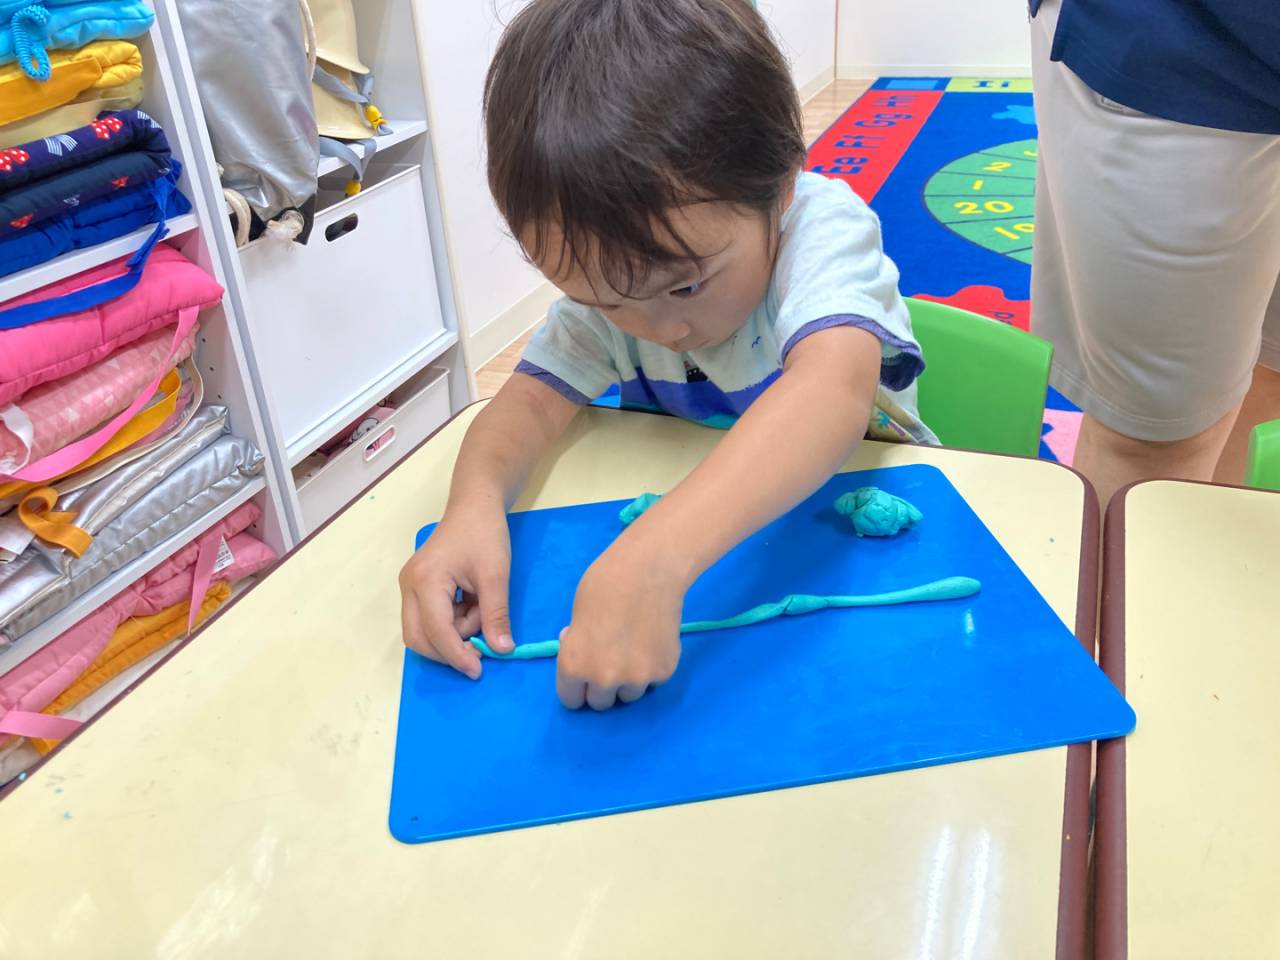 Making what we learned! (粘土で形にしてみよう！）☆ Kindy 1 (年少クラス）